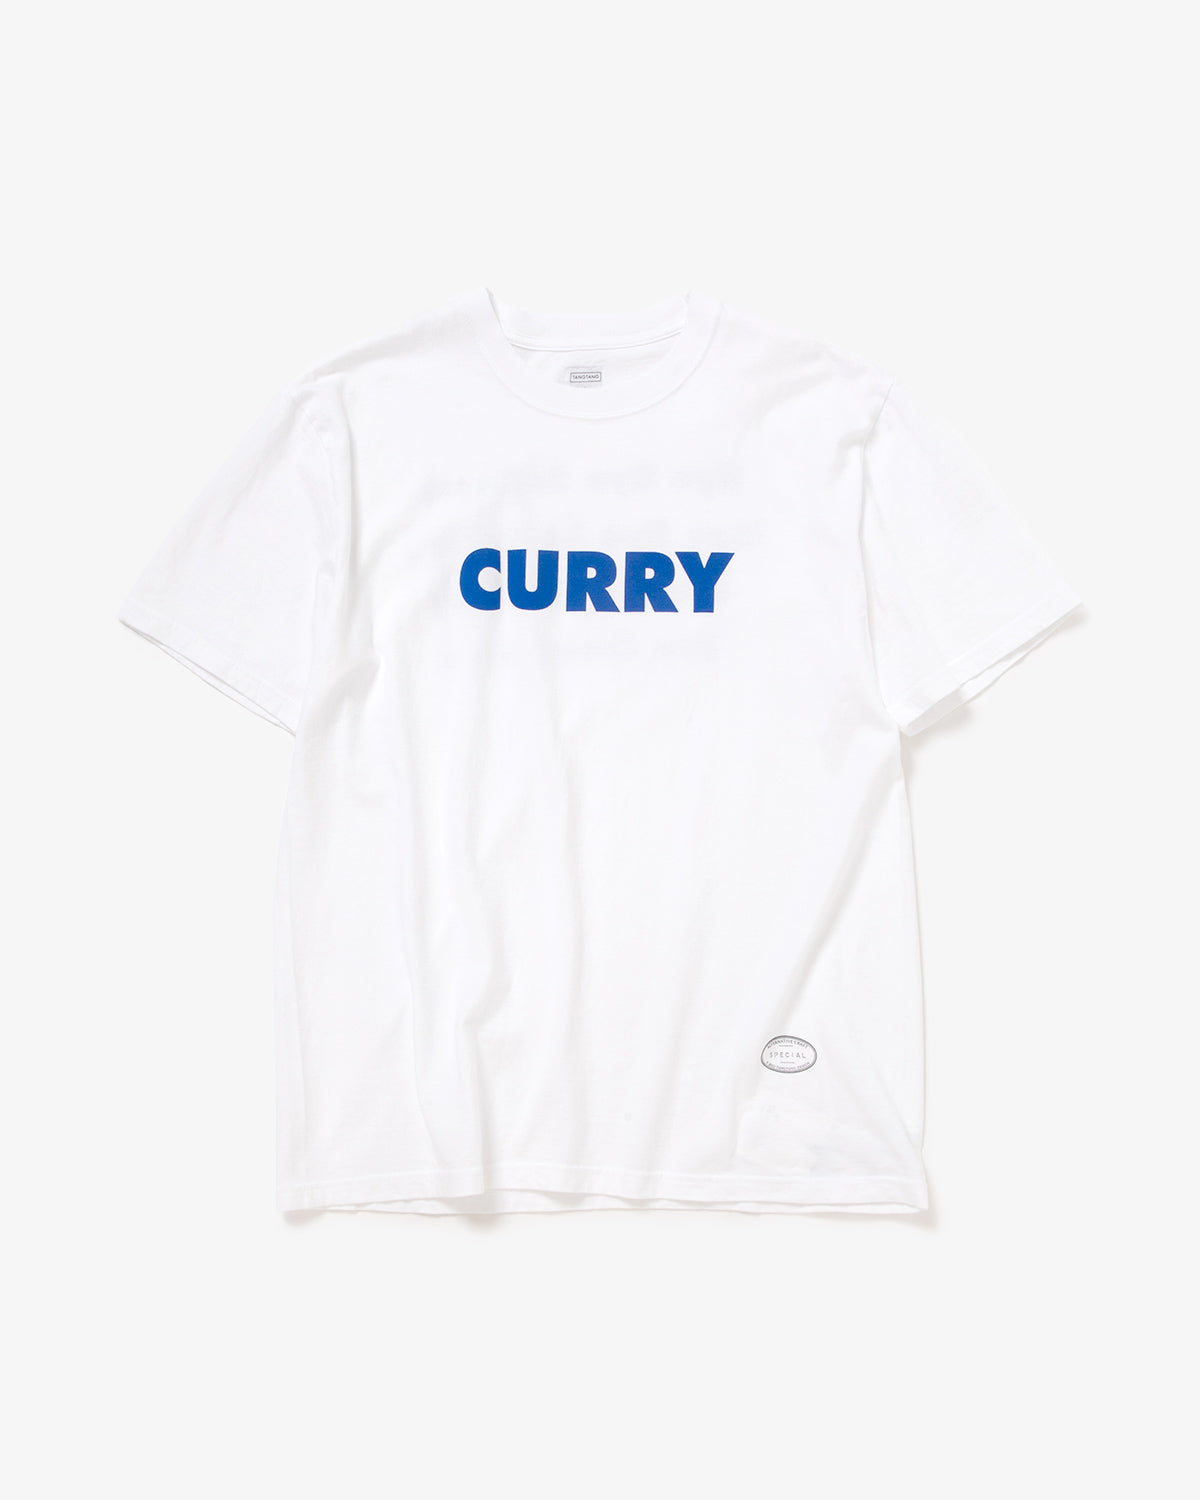 CURRY - BLUE